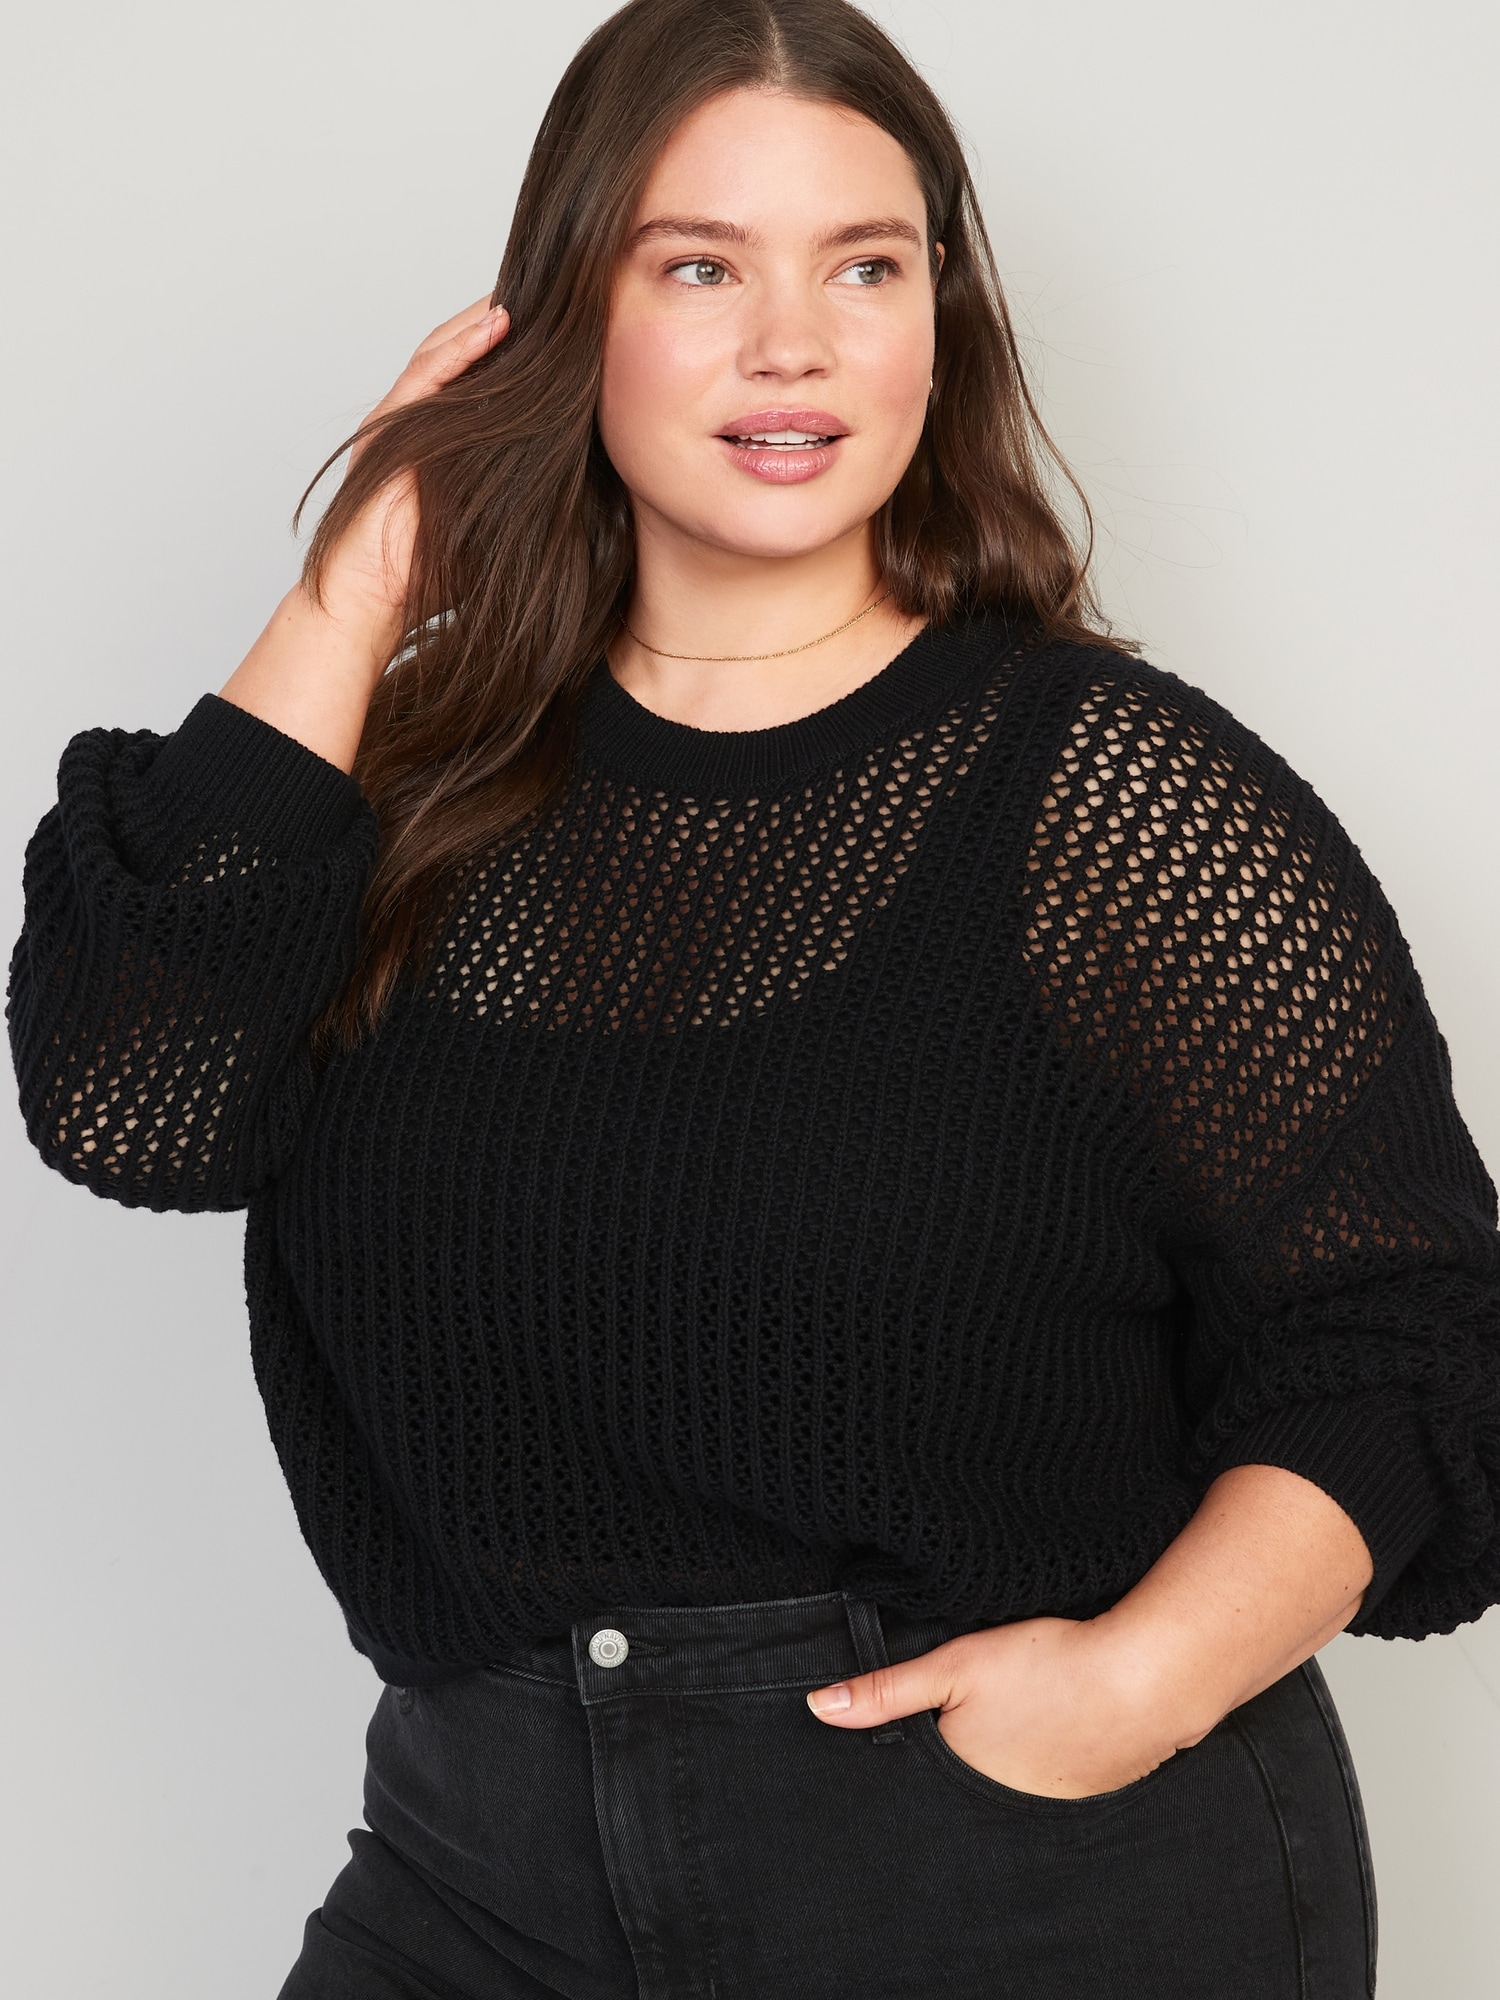 Long-Sleeve Cropped Crochet Sweater for Women | Old Navy